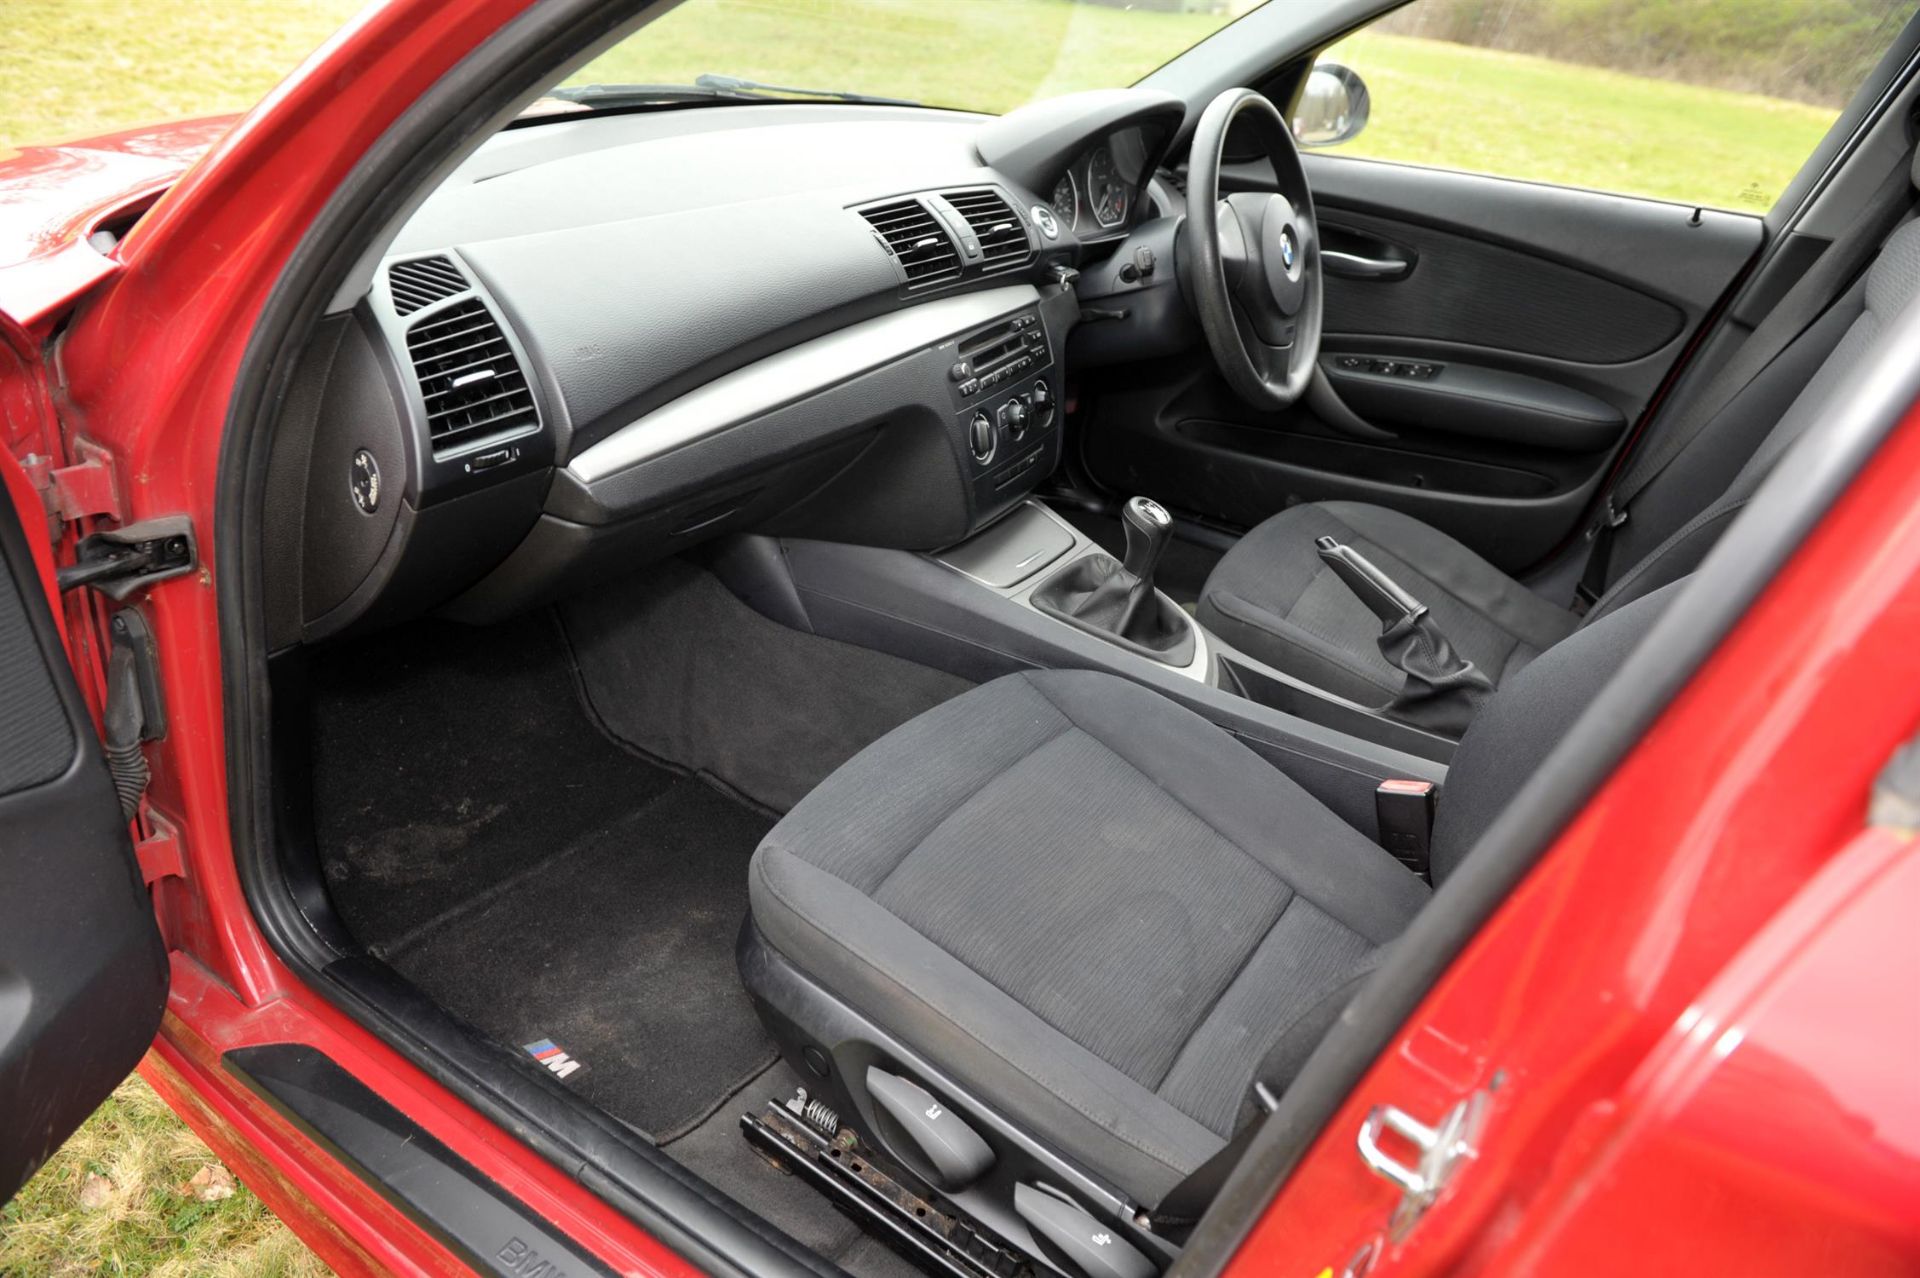 2007 BMW 116i 5 Door in red. Registration number LD57 WNZ - Economical and benefiting from the - Image 7 of 14